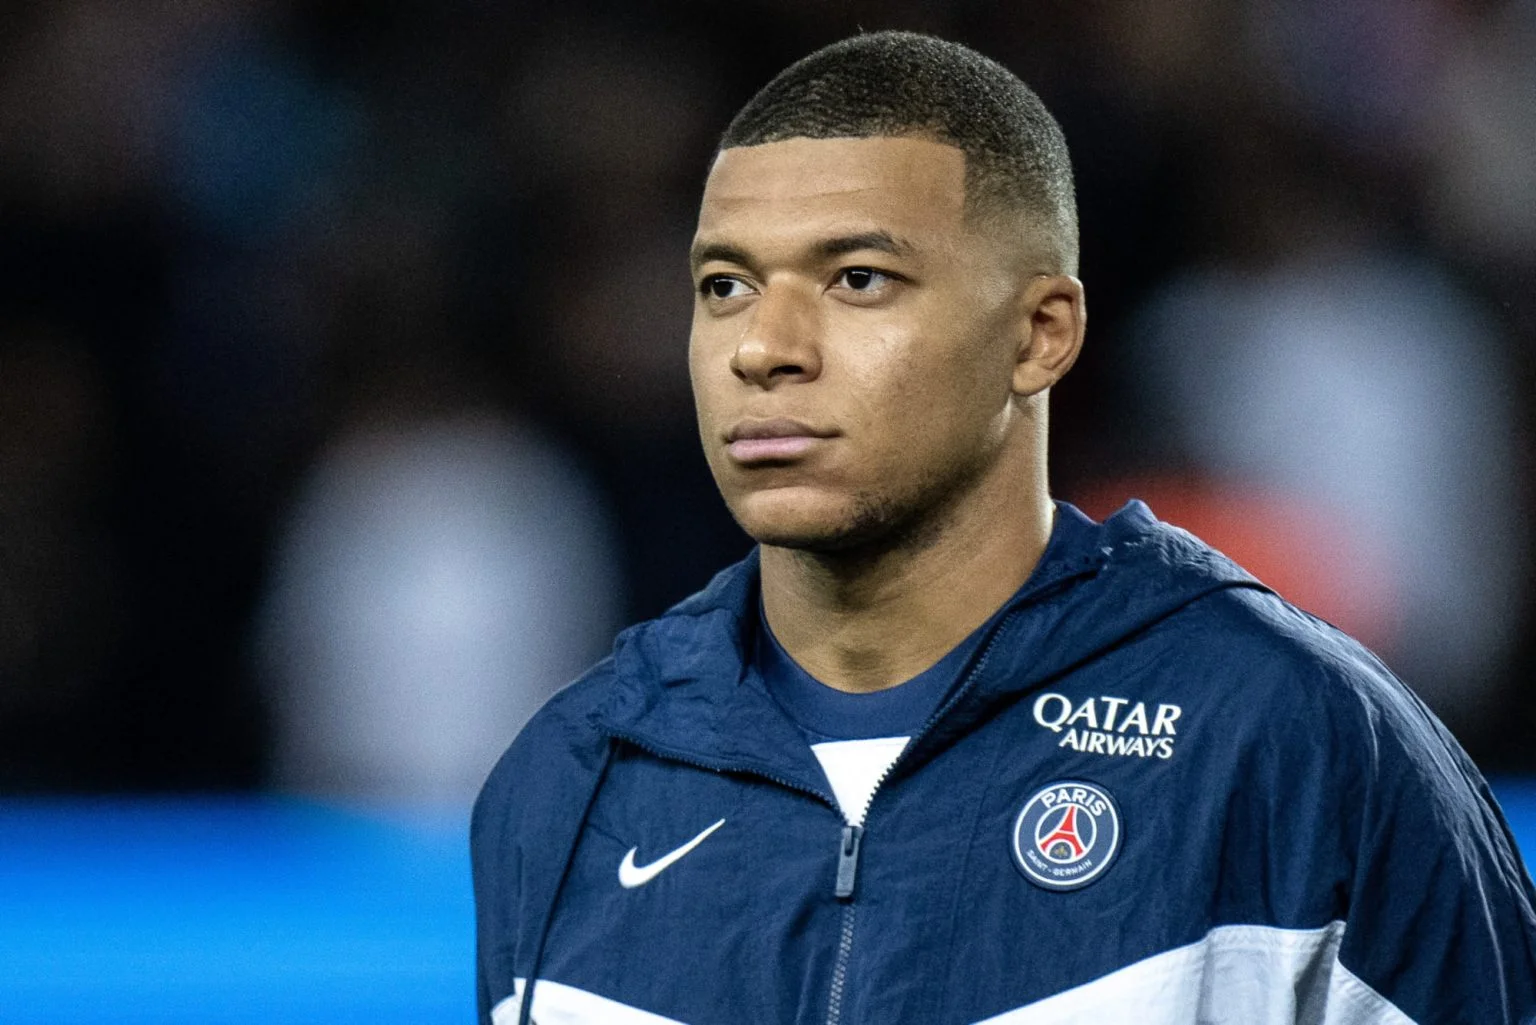 Mbappe to be sold after latest ultimatum